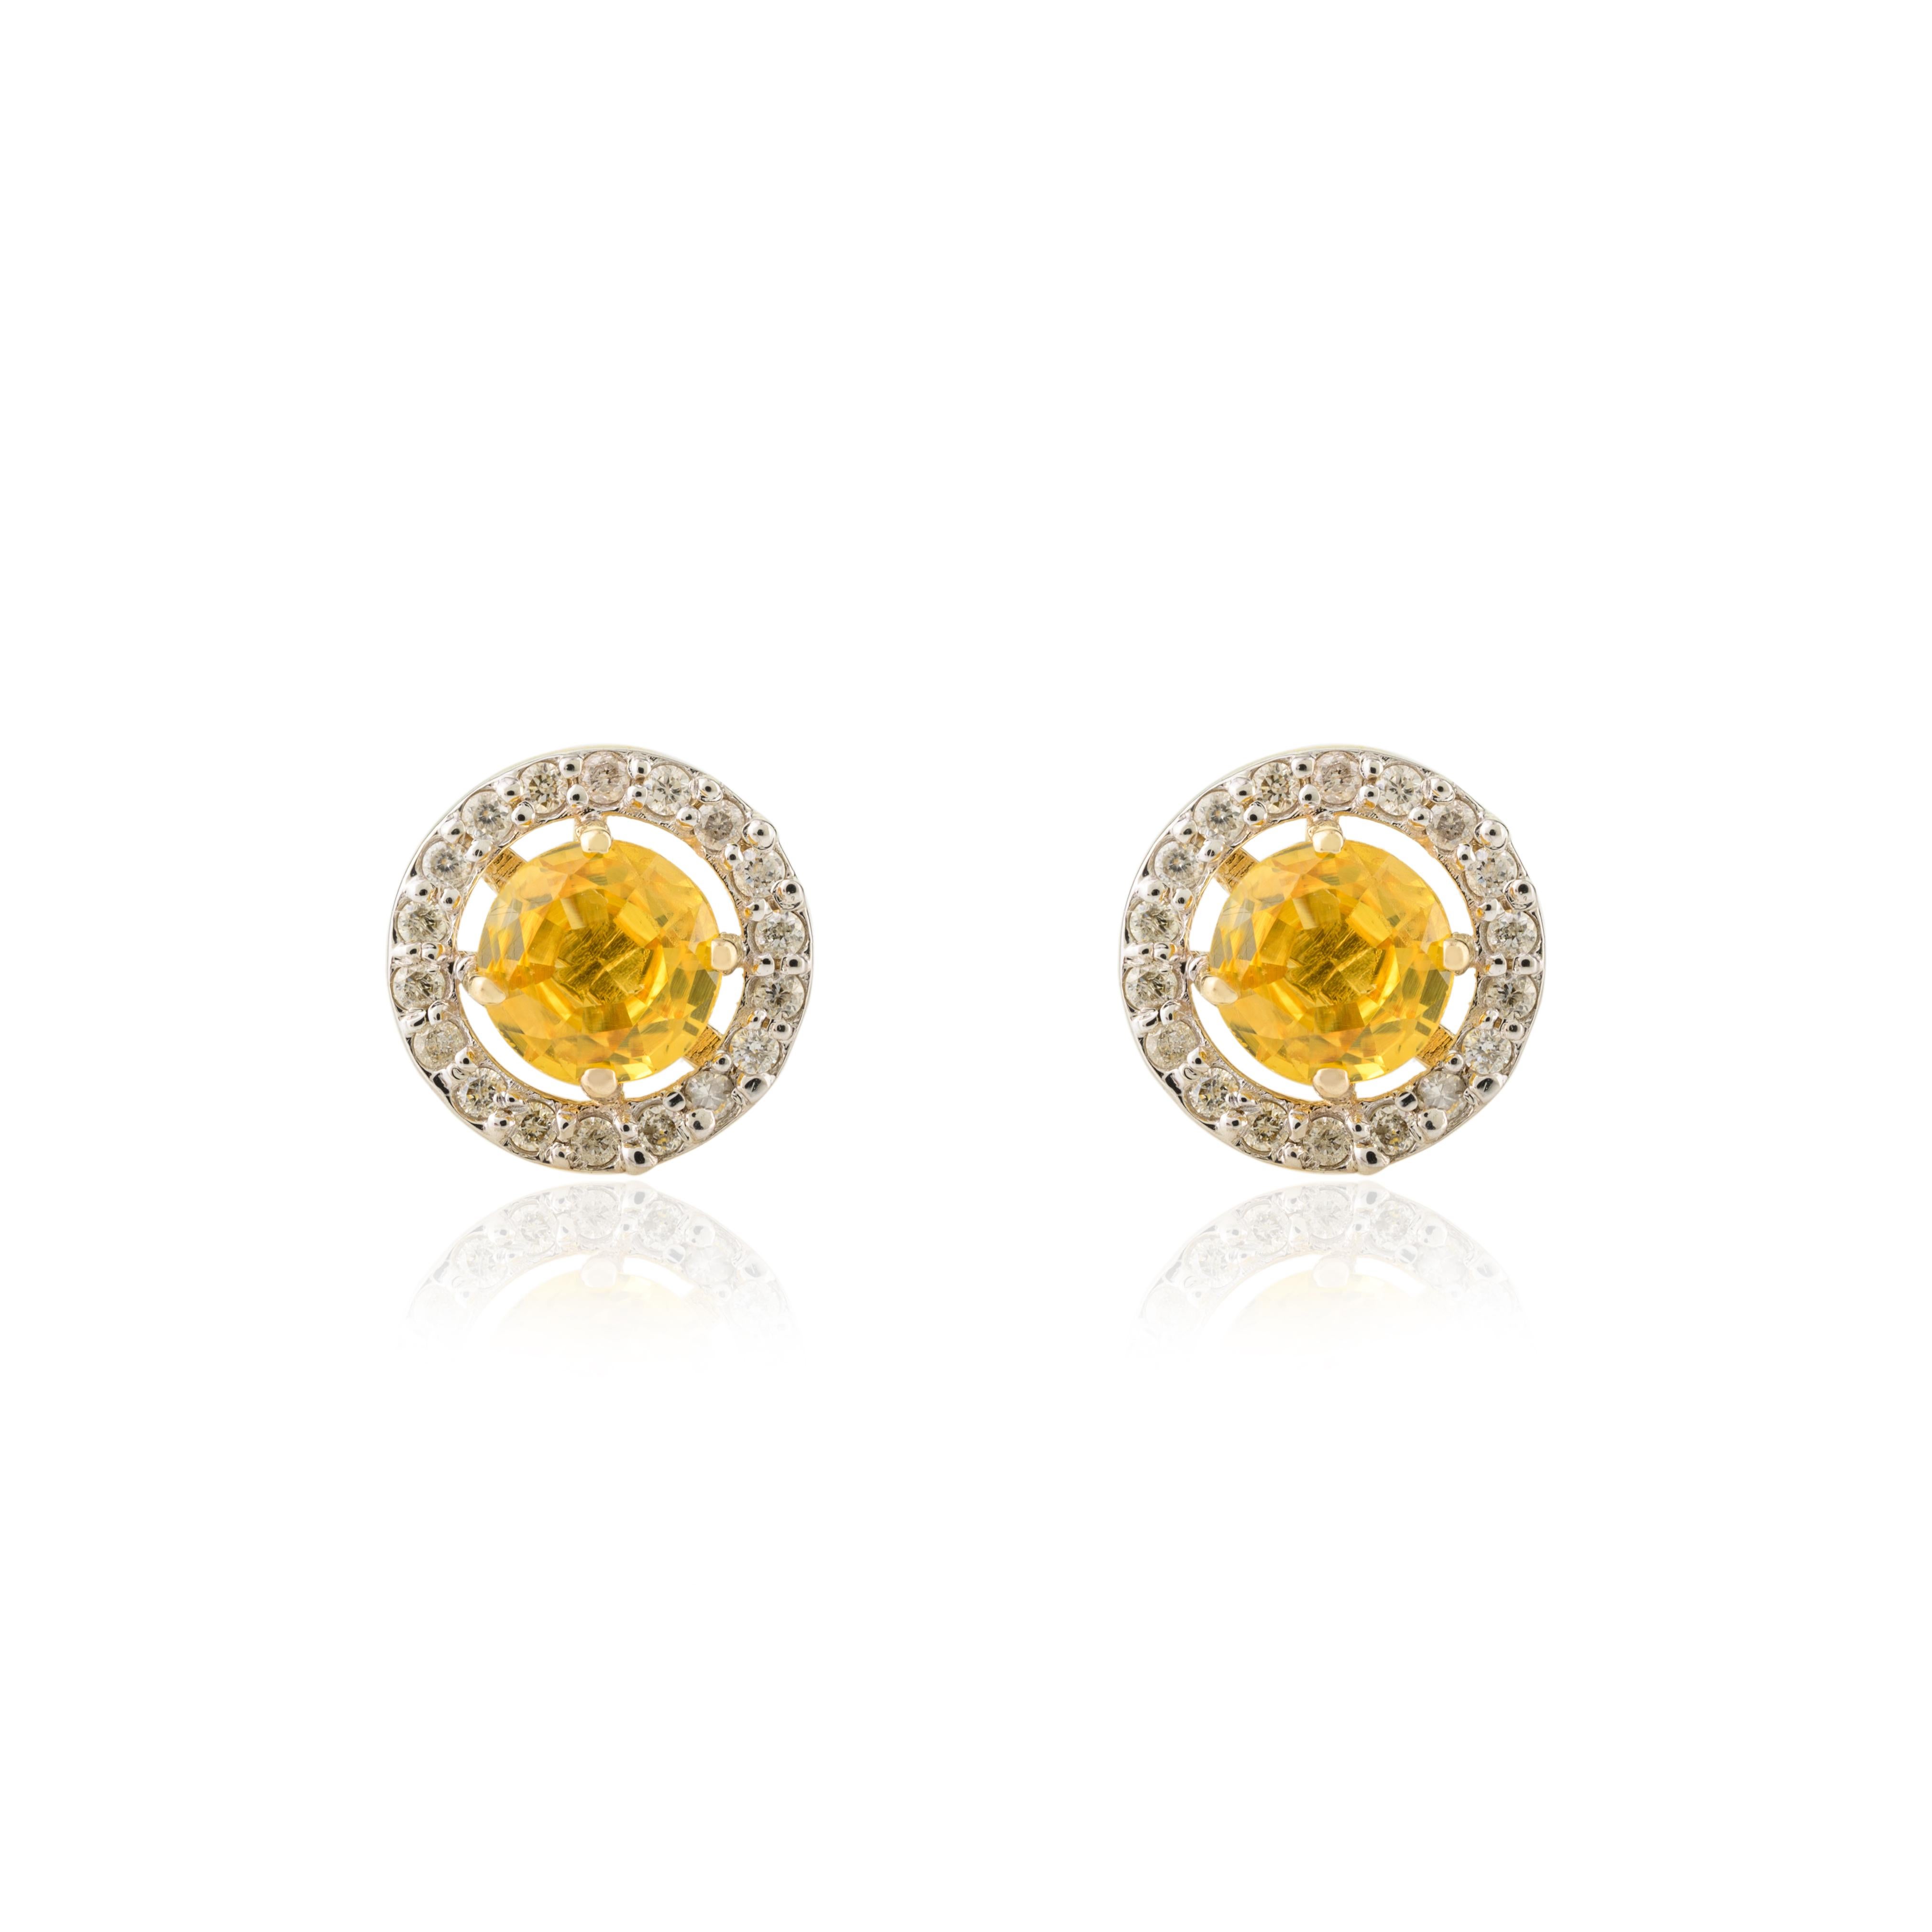 Modern 1 Carat Round Yellow Sapphire Diamond Halo Stud Earrings in 14k Yellow Gold For Sale